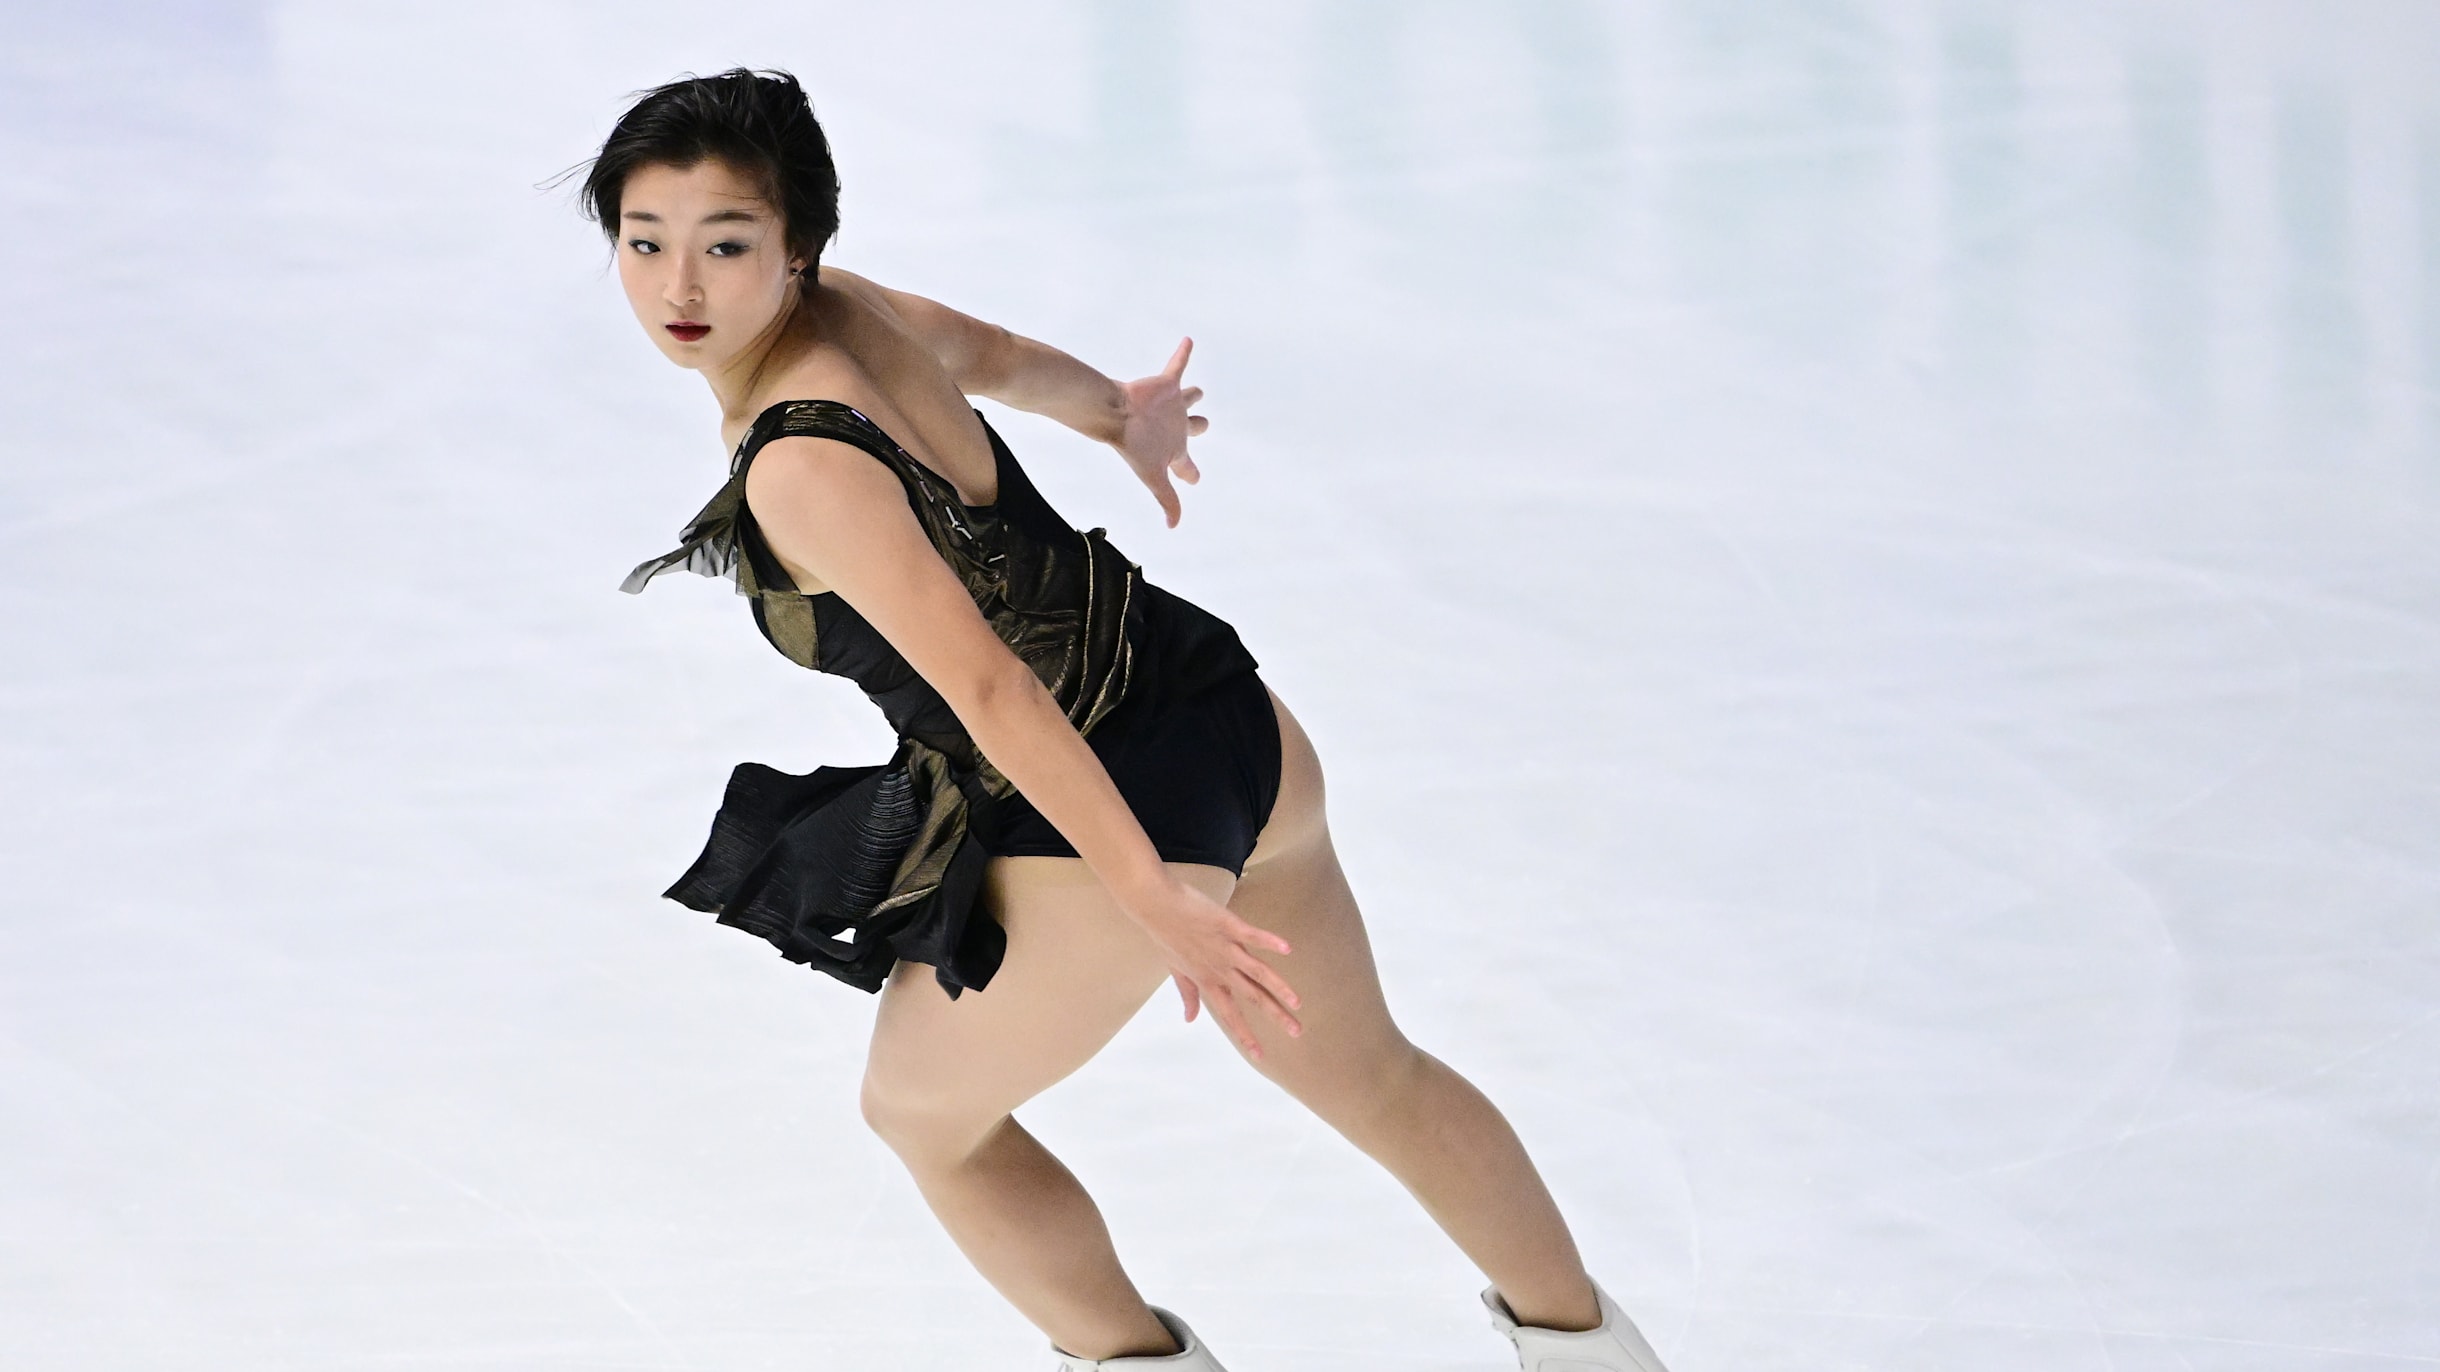 2023 Winter World University Games figure skating schedule, preview, how to watch